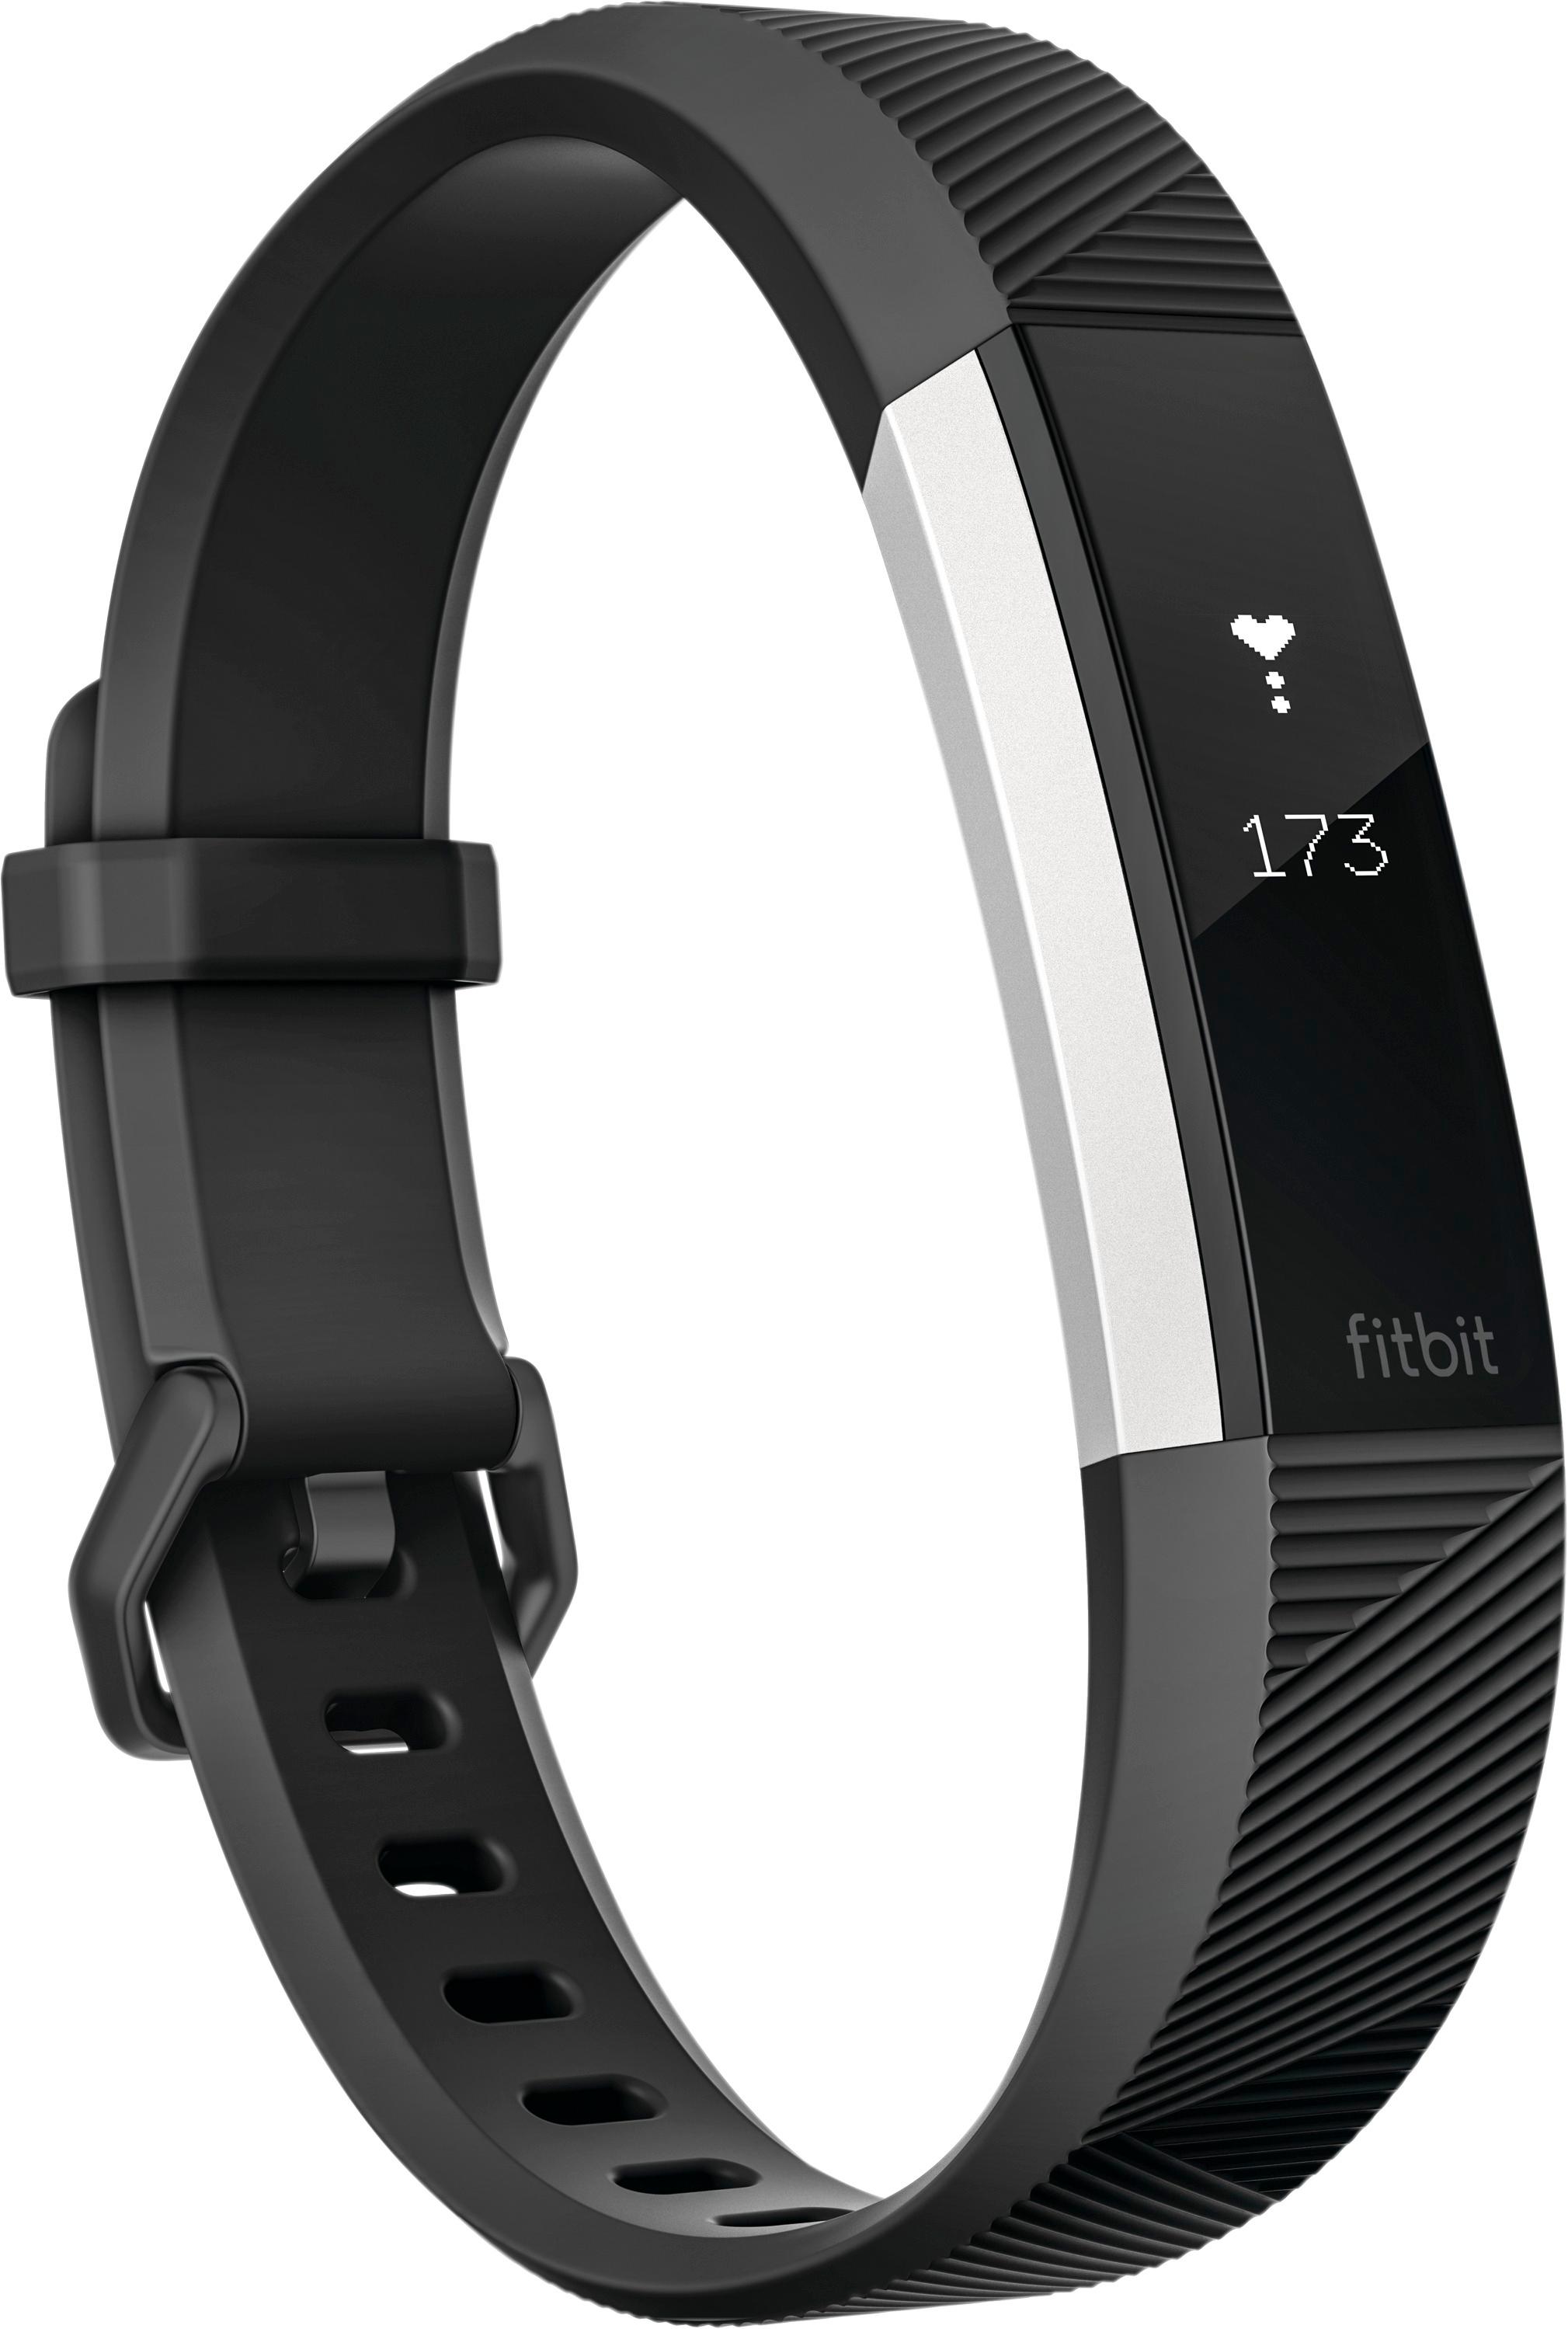 fitbit with location tracker